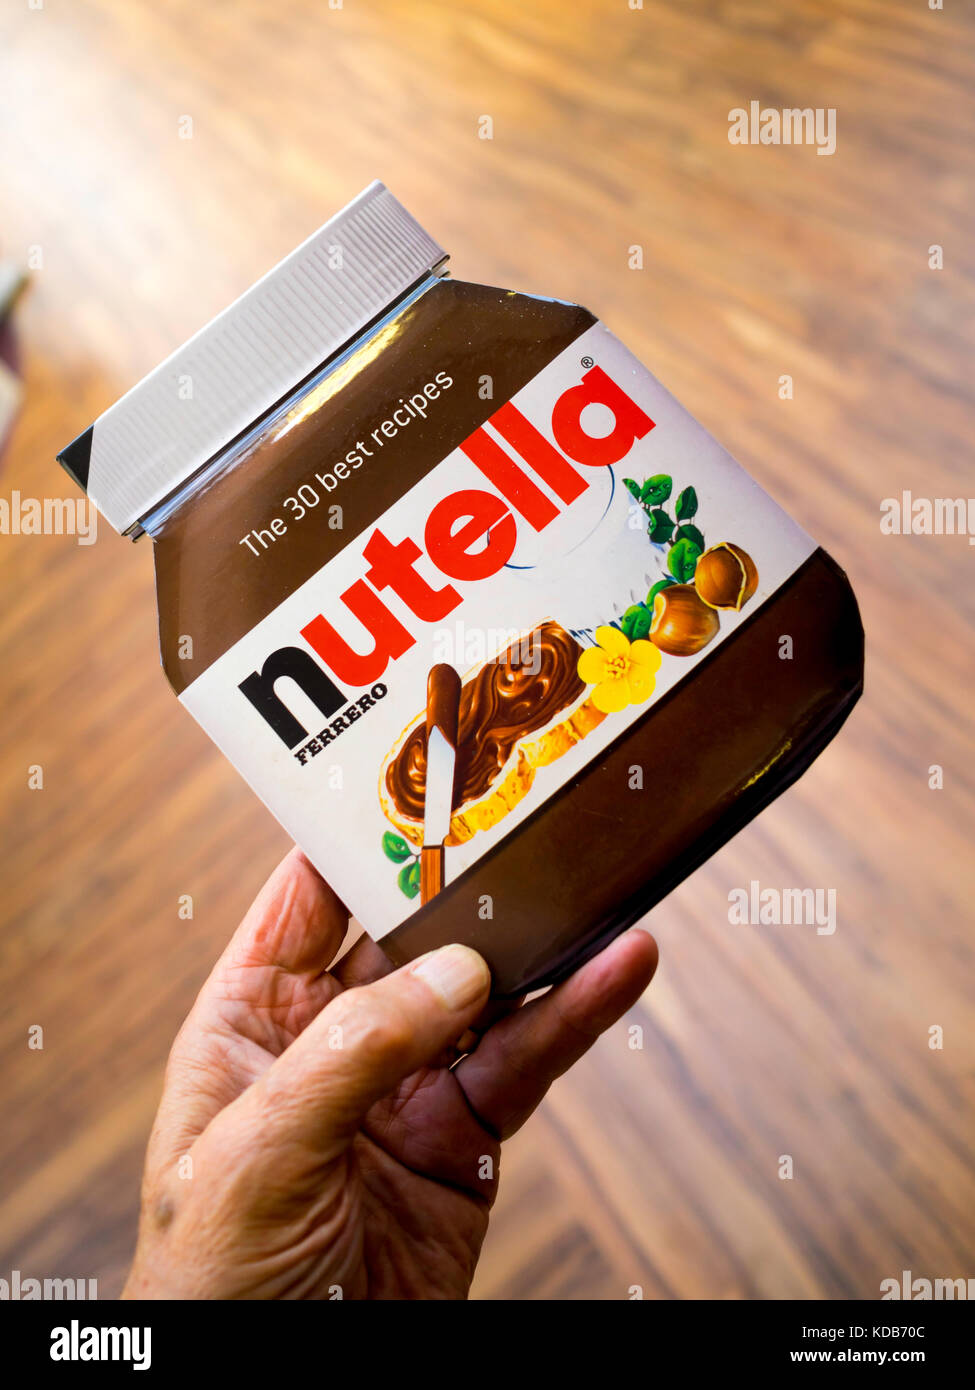 A man's hand holding a cookery book shaped like a jar of Nut paste Nutella and providing 30 best recipes for its use Stock Photo